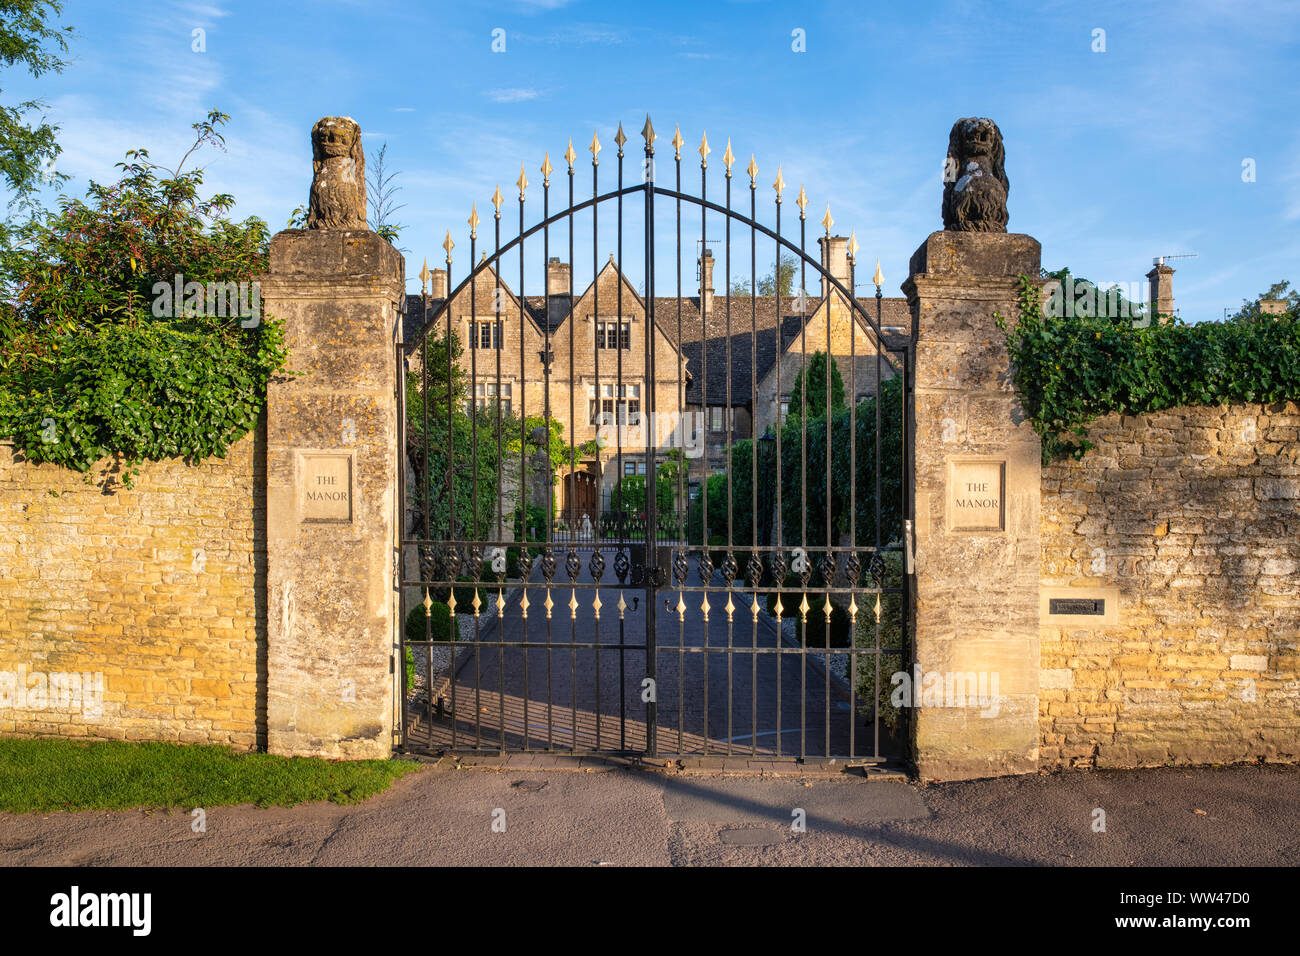 Sunrise light on The Manor, Bourton on the Water, Cotswolds, Gloucestershire, England Stock Photo